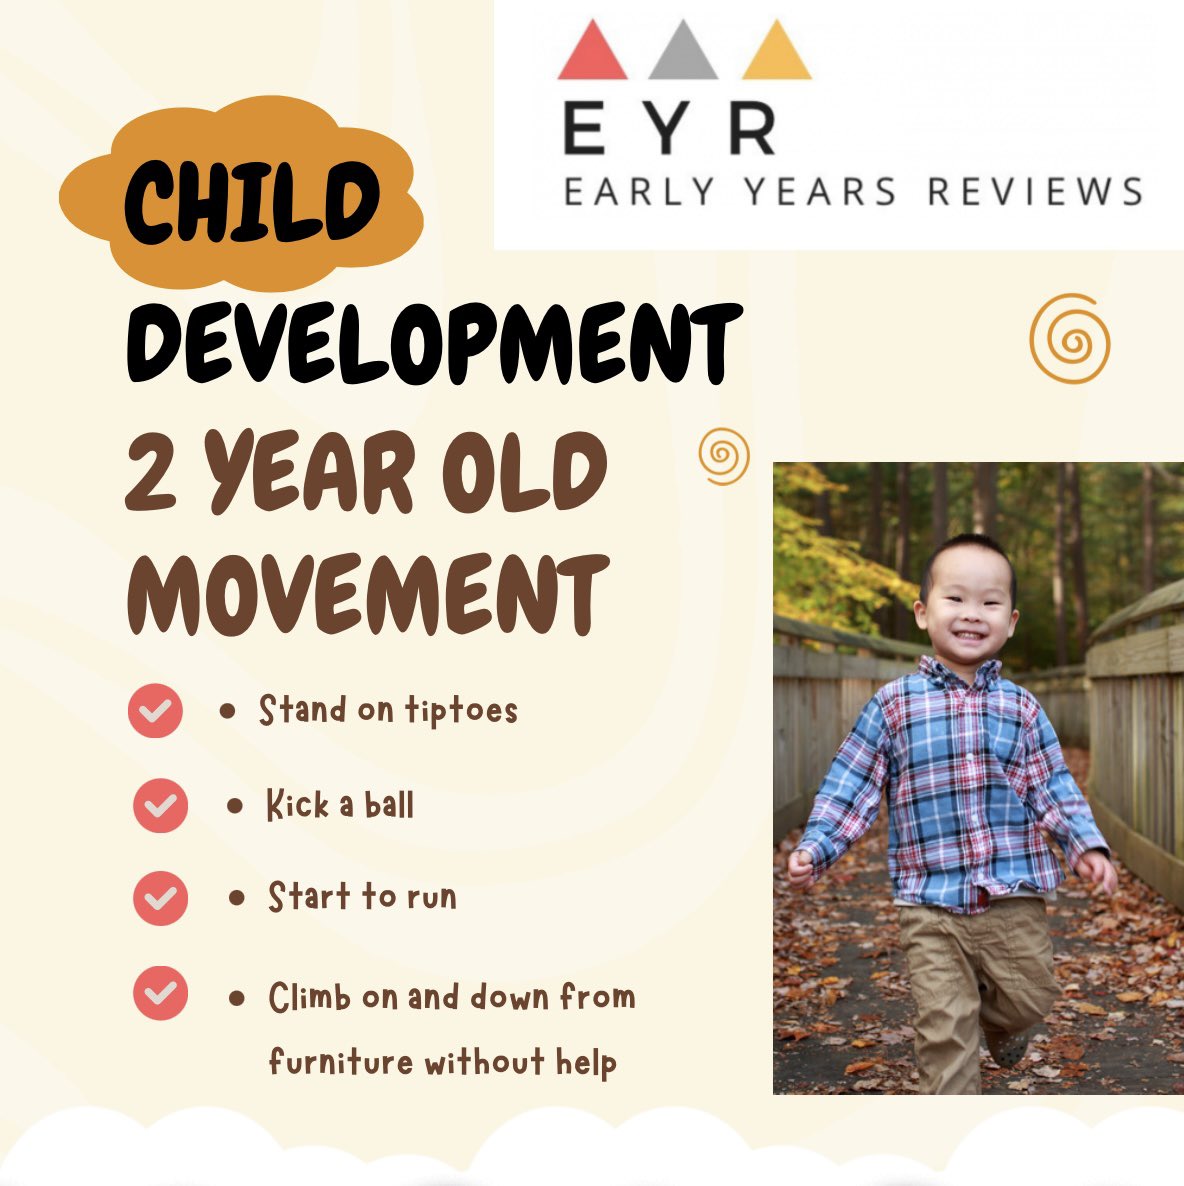 2 year old development always comes up at conferences and in discussions. Don’t think because the way you do things for 3-5 year olds it’s the same for 2 year olds. They have not yet grasped many things a 3 year old can do. So start with the child in the Now. Focus on movement 👍